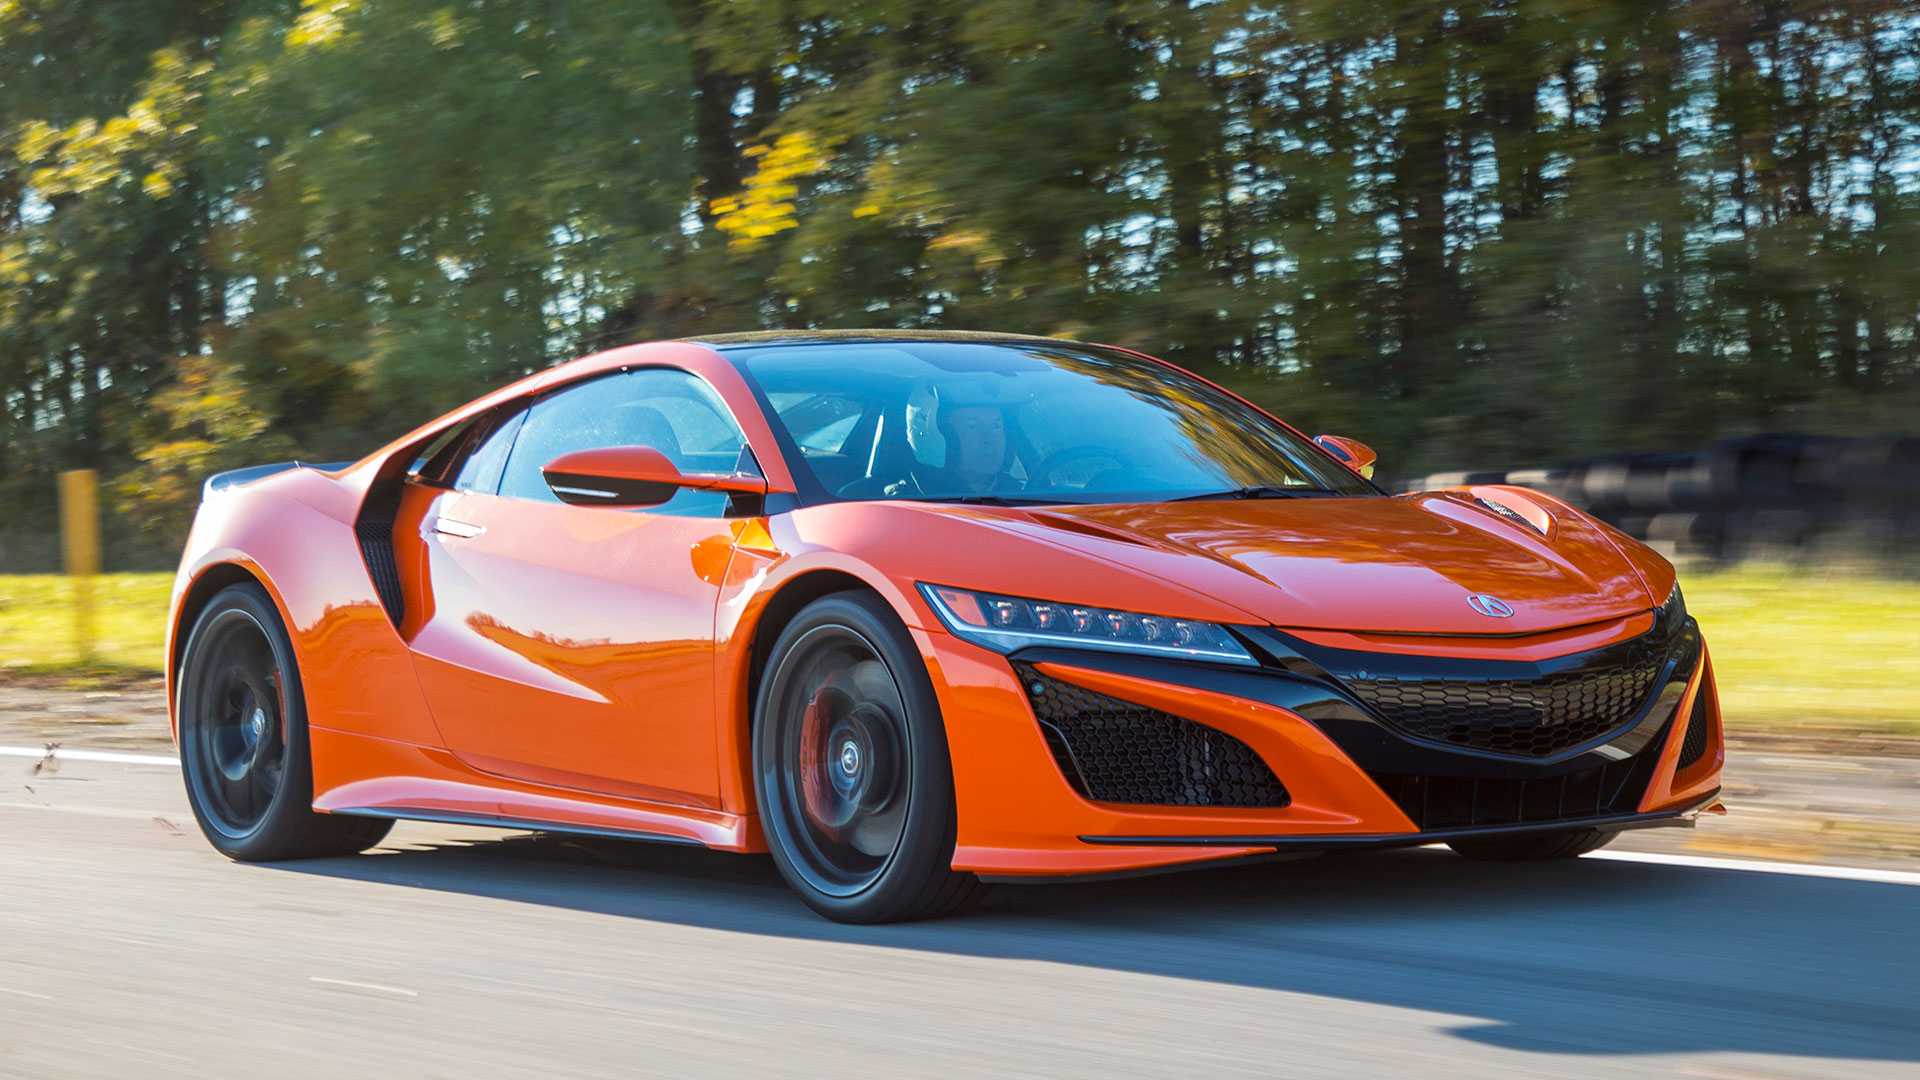 2019 Acura NSX Wallpapers | SuperCars.net